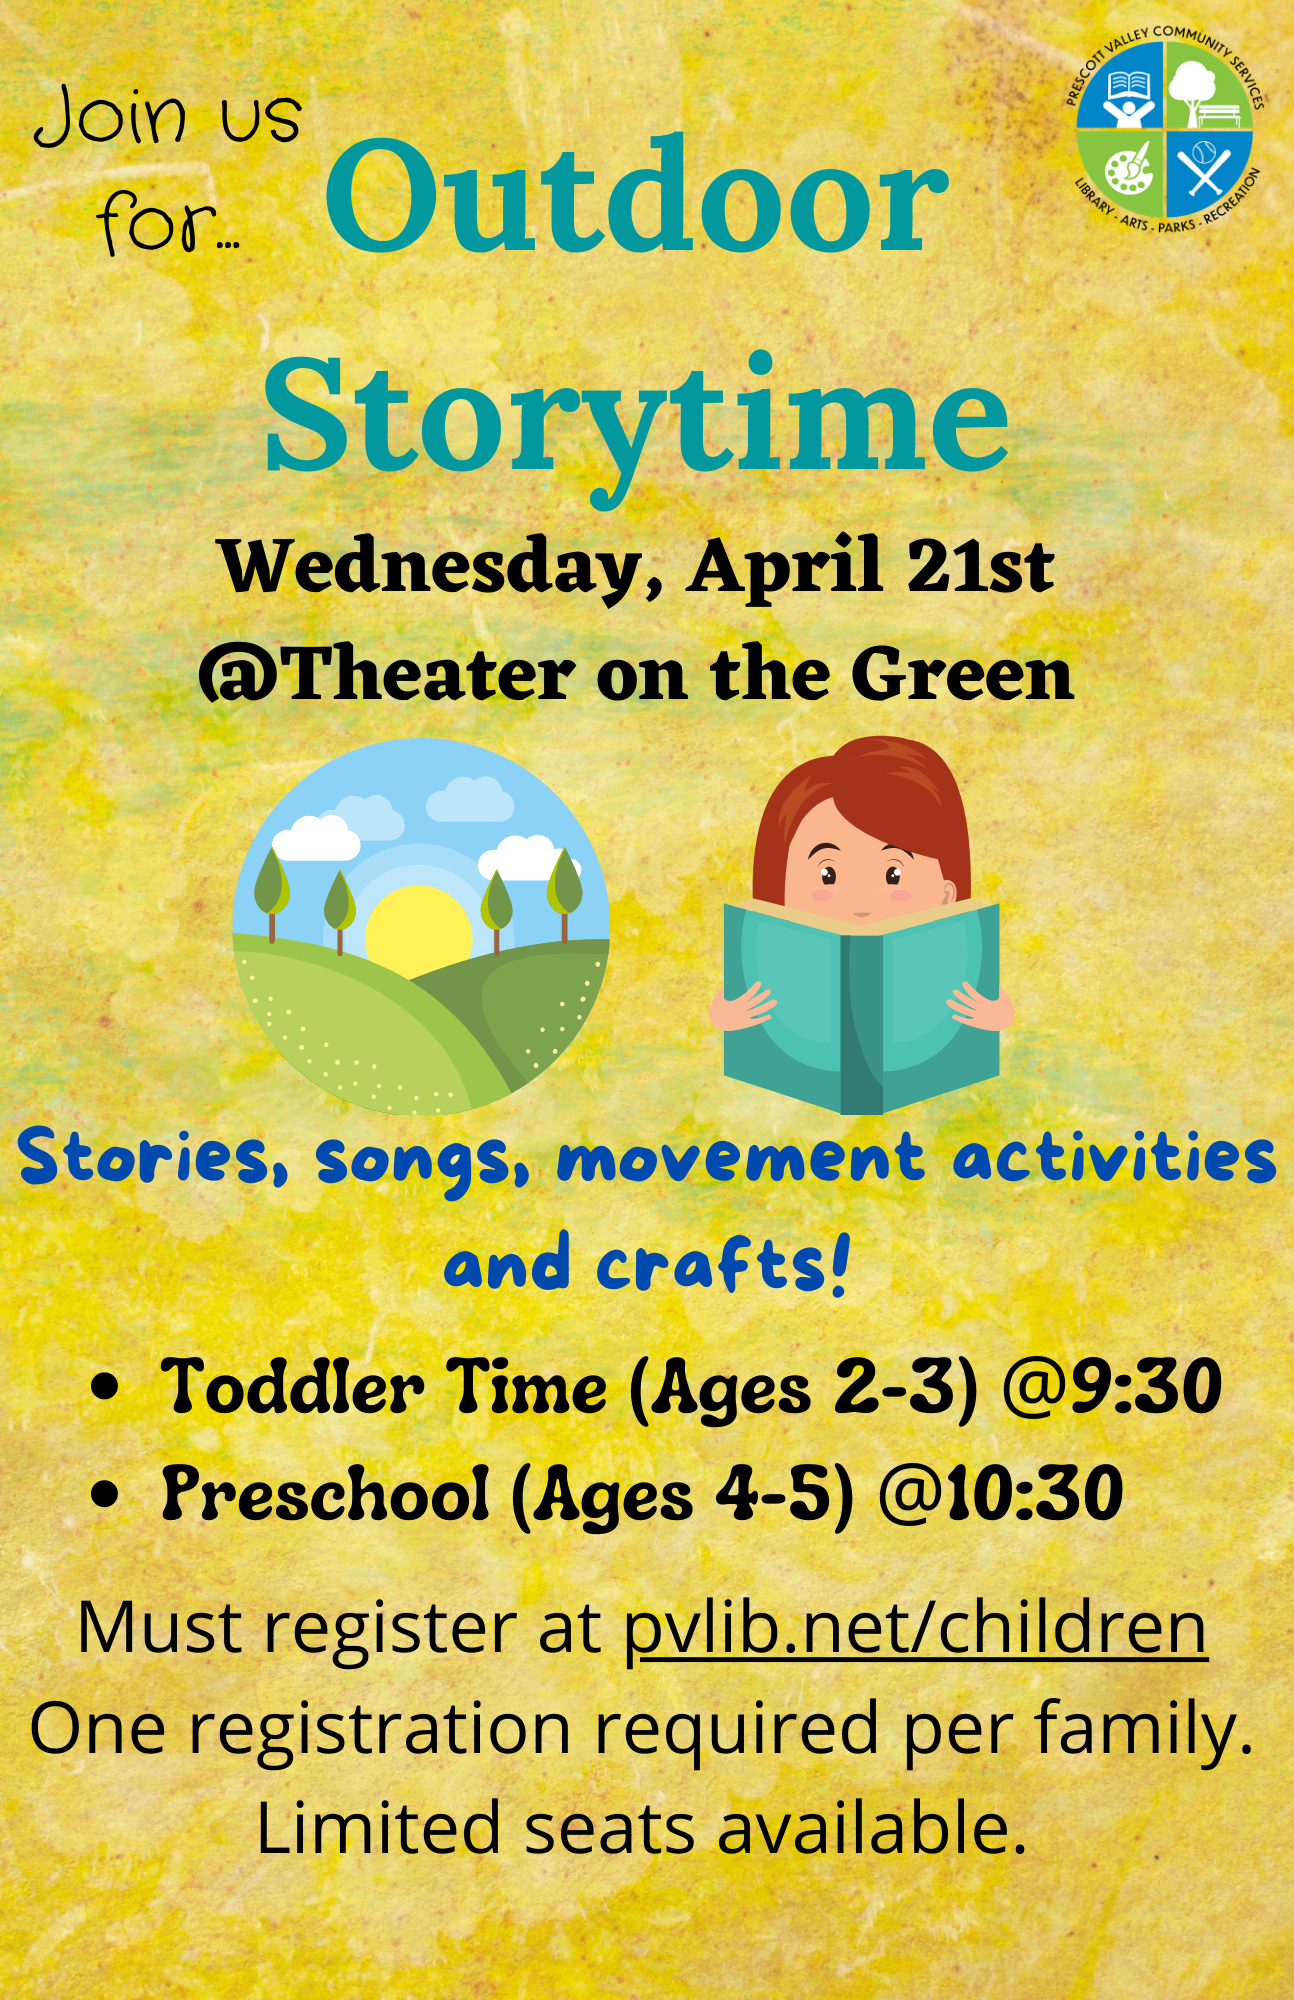 Preschool Story Time: meets at 10:30 on April 21 at the Theater on the Green